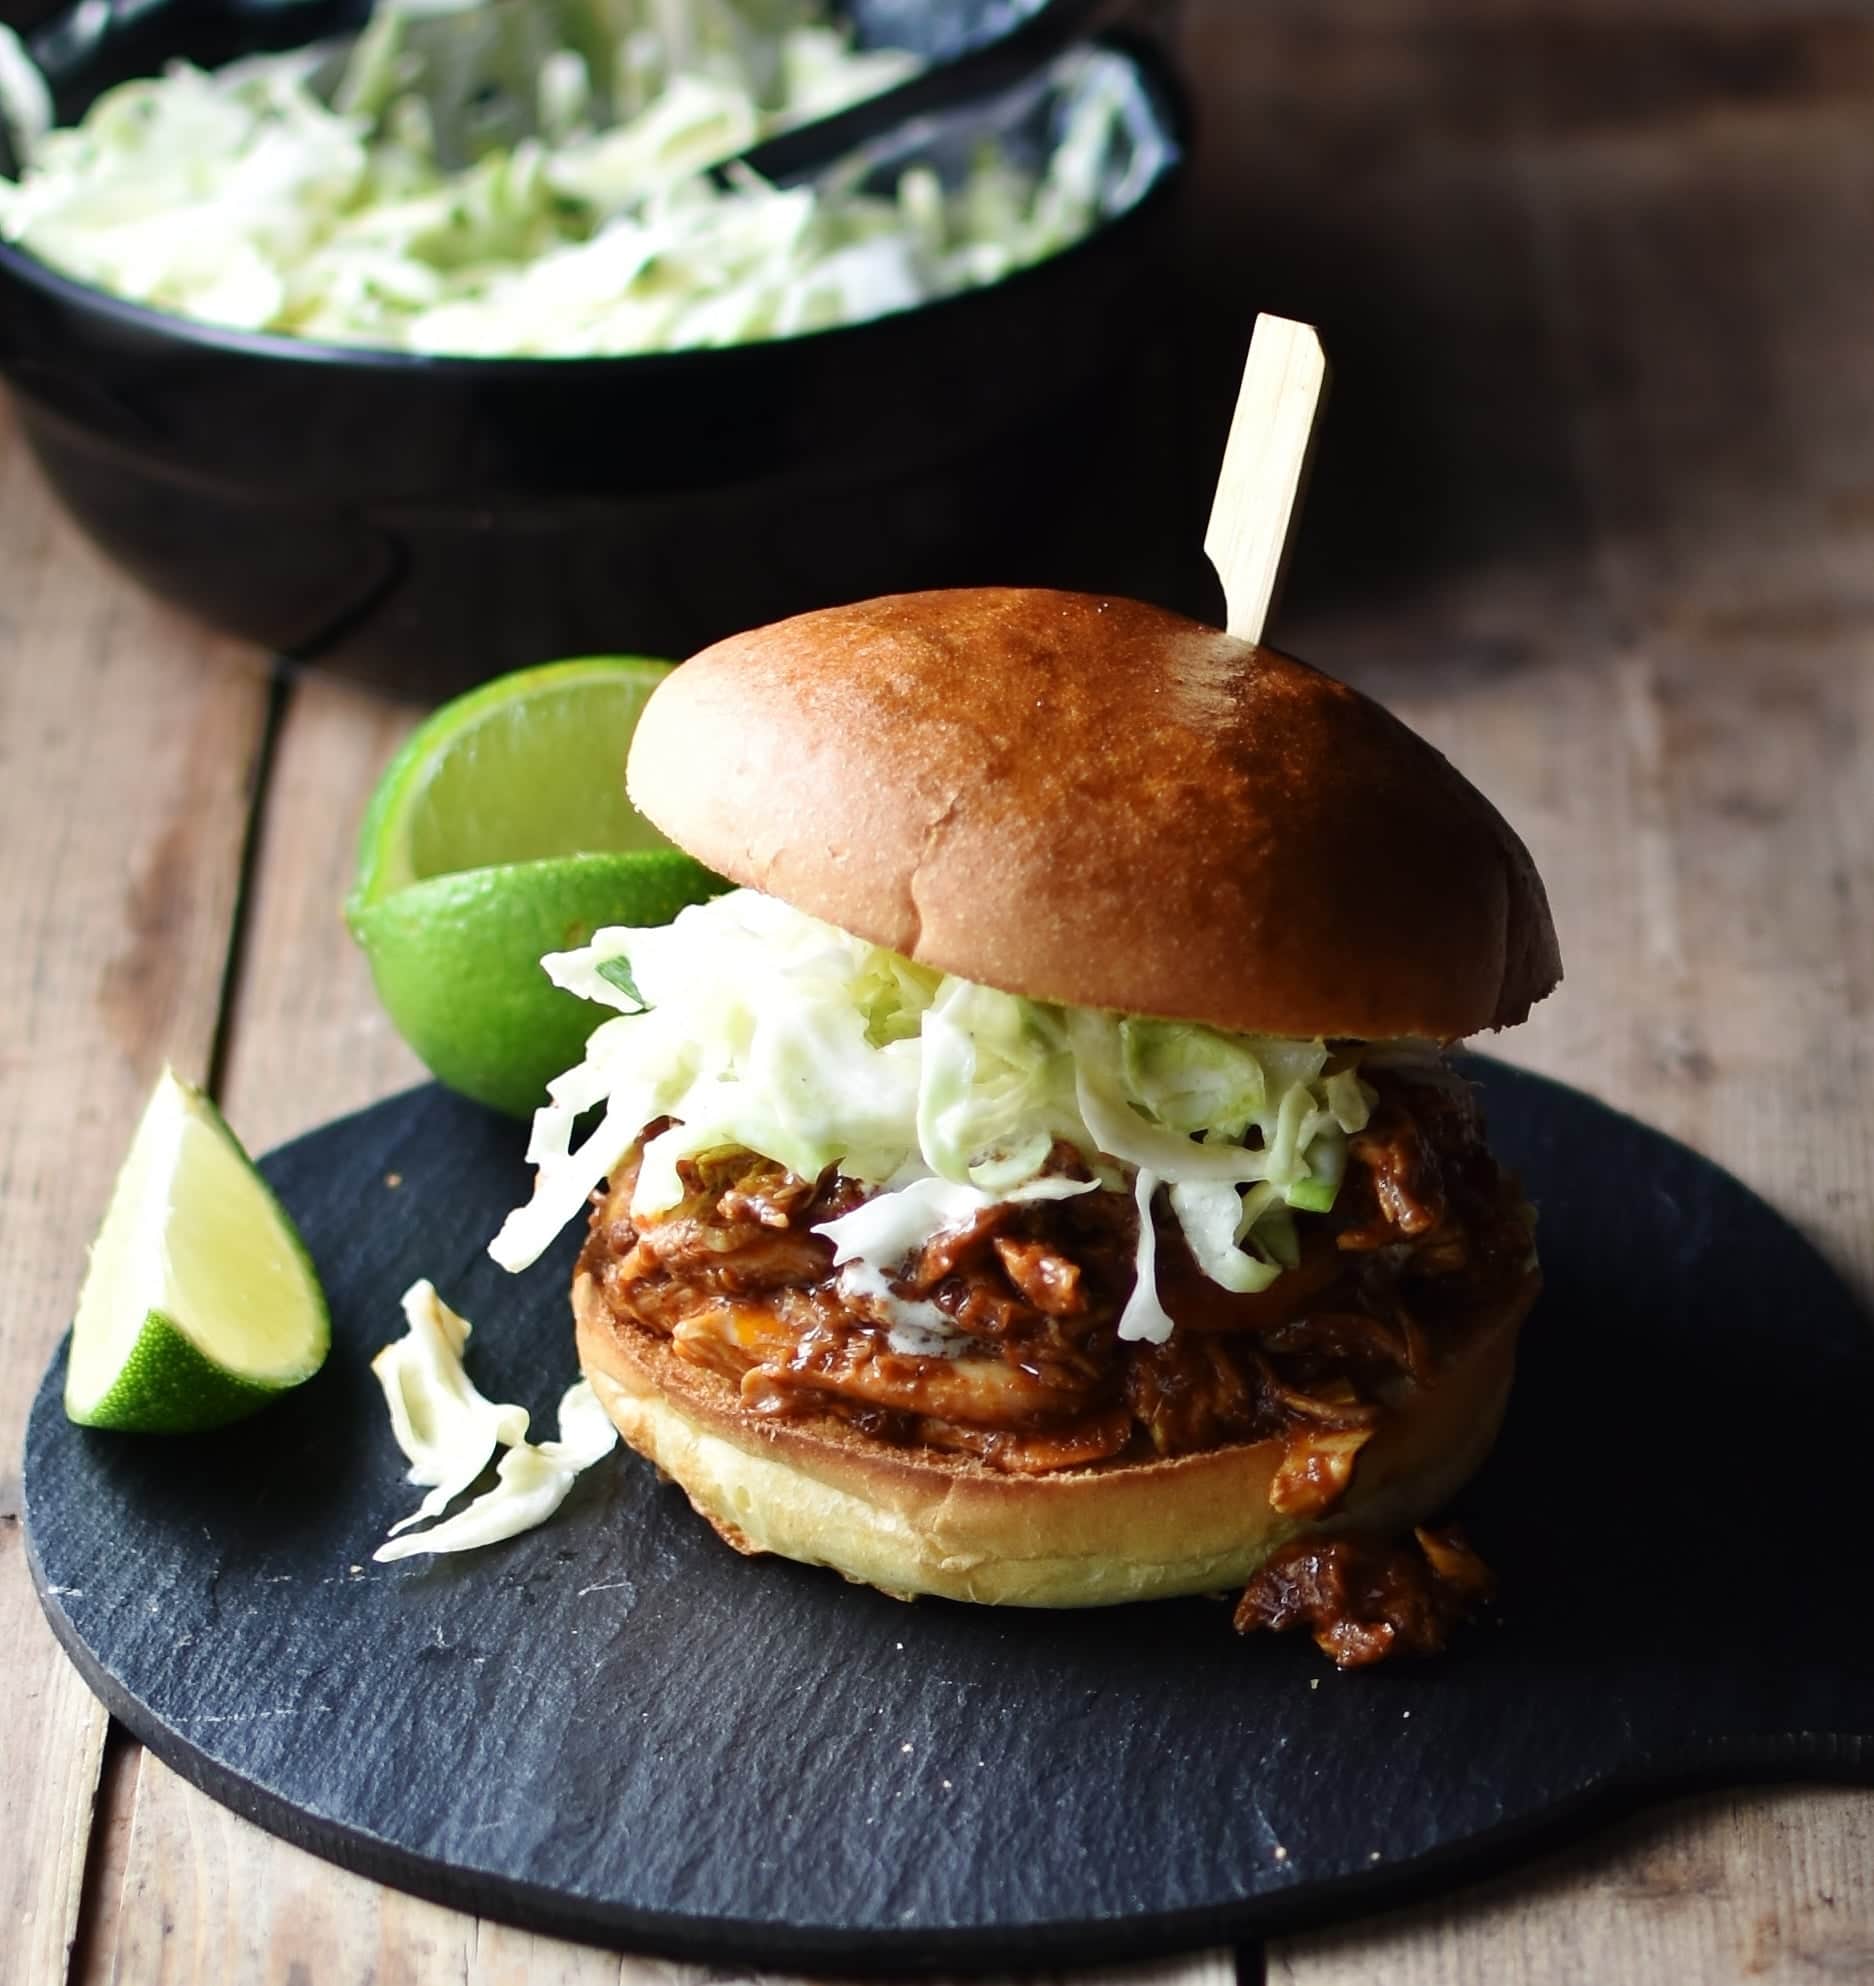 Side view of shredded chicken with coleslaw inside burger bun pierced with bamboos stick, with lime and coleslaw in black dish in background.